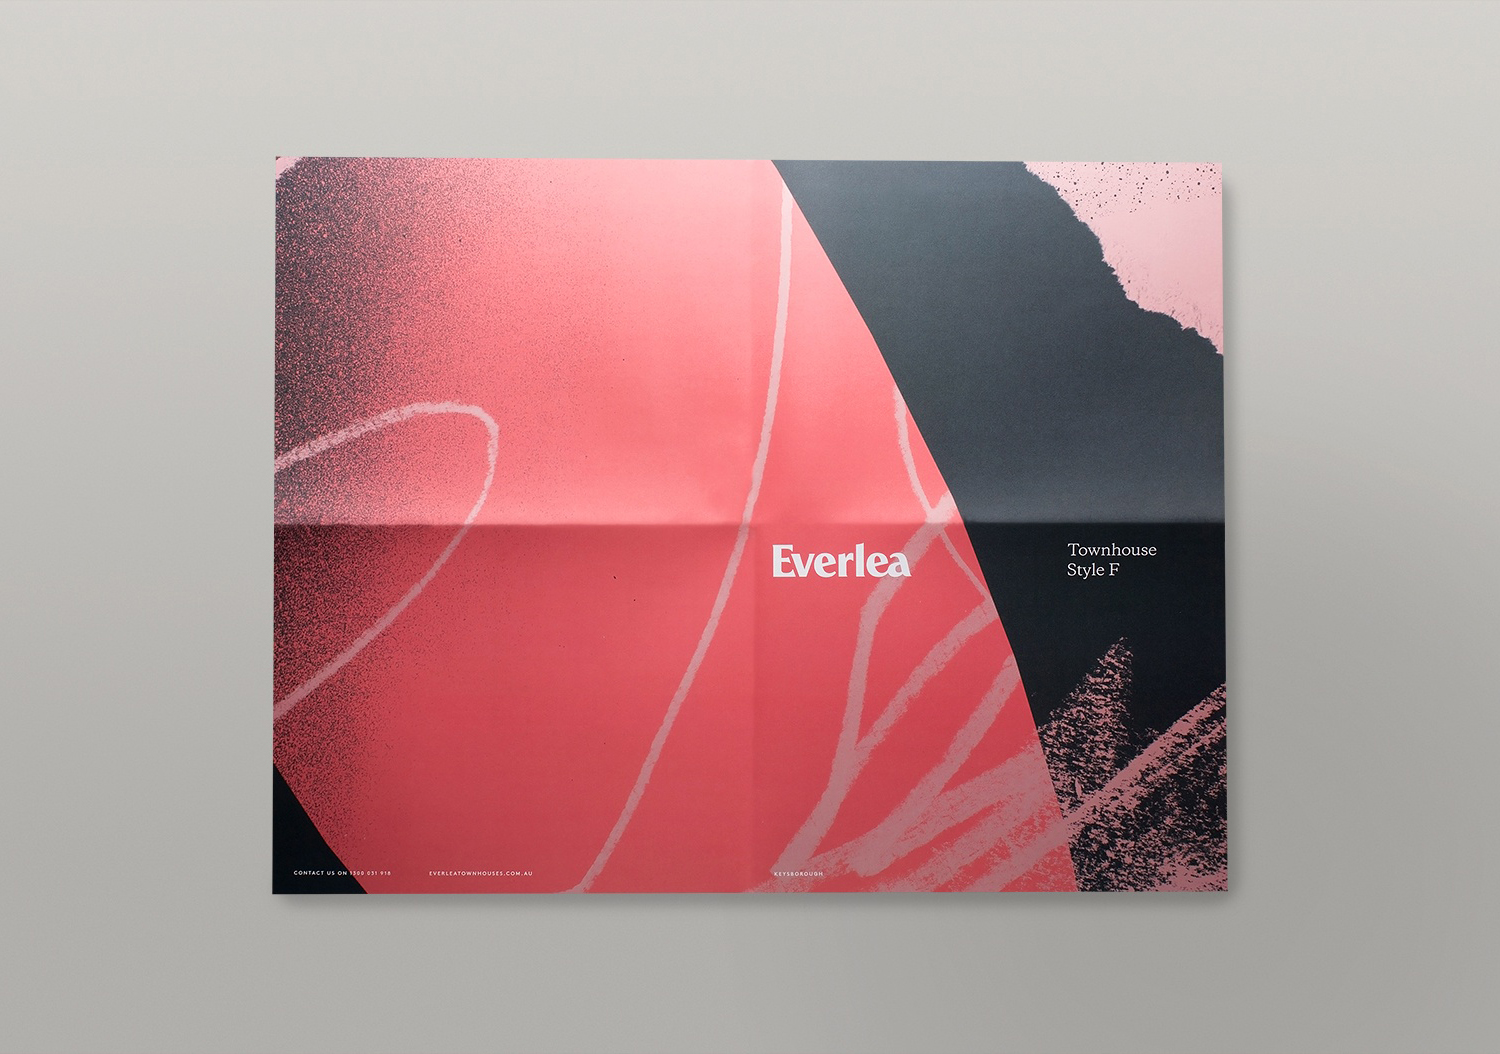 Visual identity and print for Everlea by Studio Brave featuring illustration by Tom Abbiss Smith